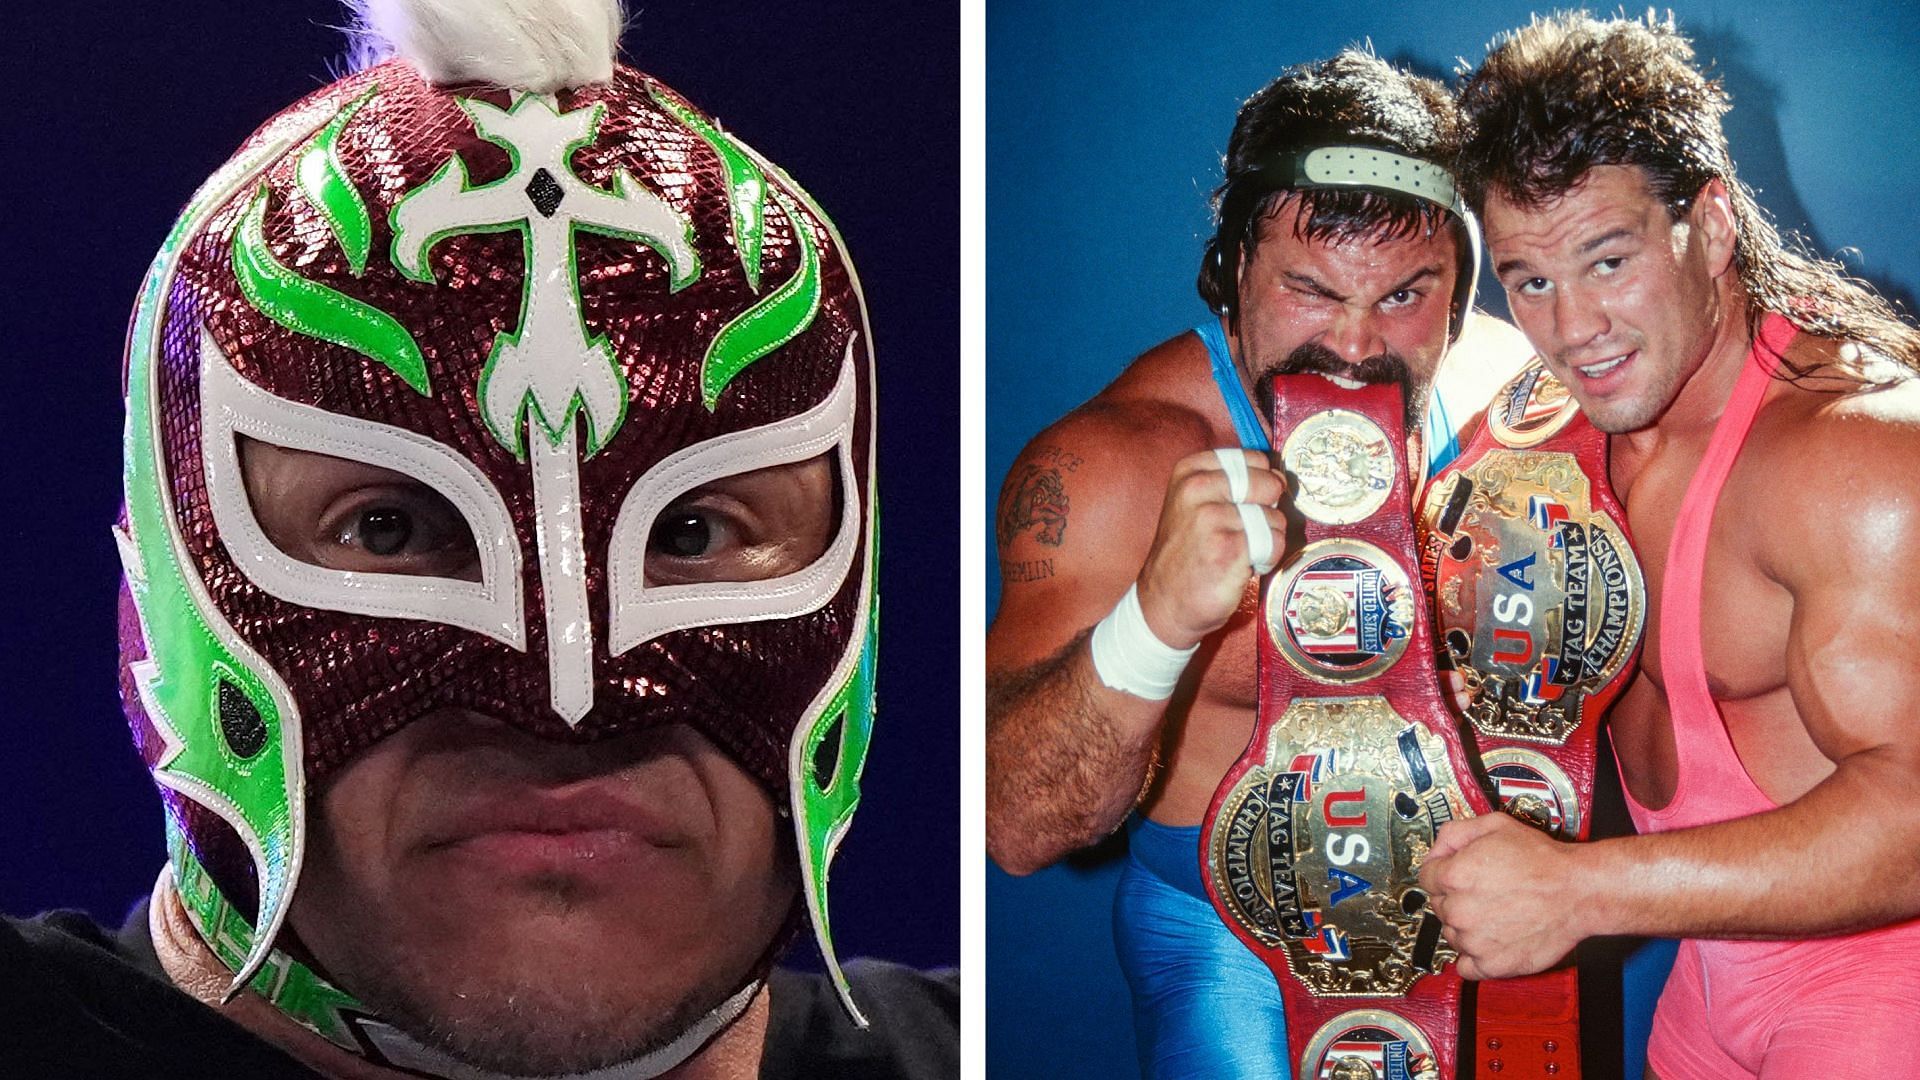 Several legends including Rey Mysterio have sons who work in WWE